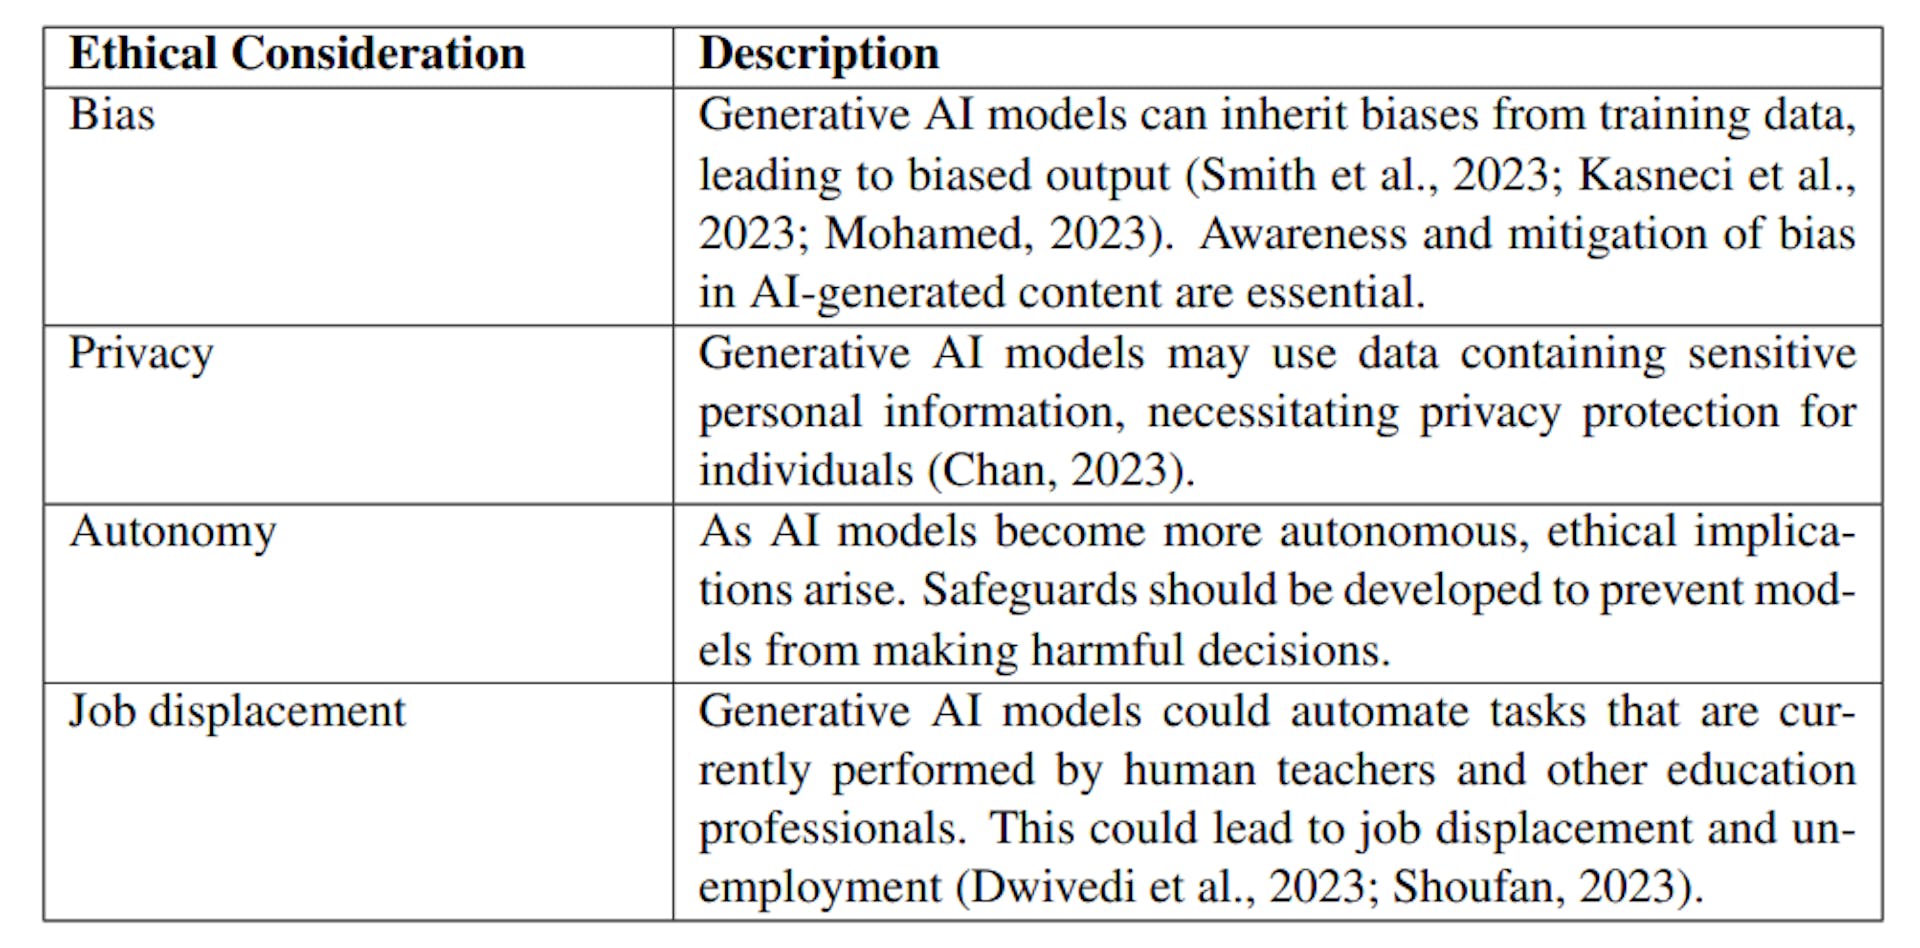 Table 3: Ethical Considerations of Using Generative AI Models